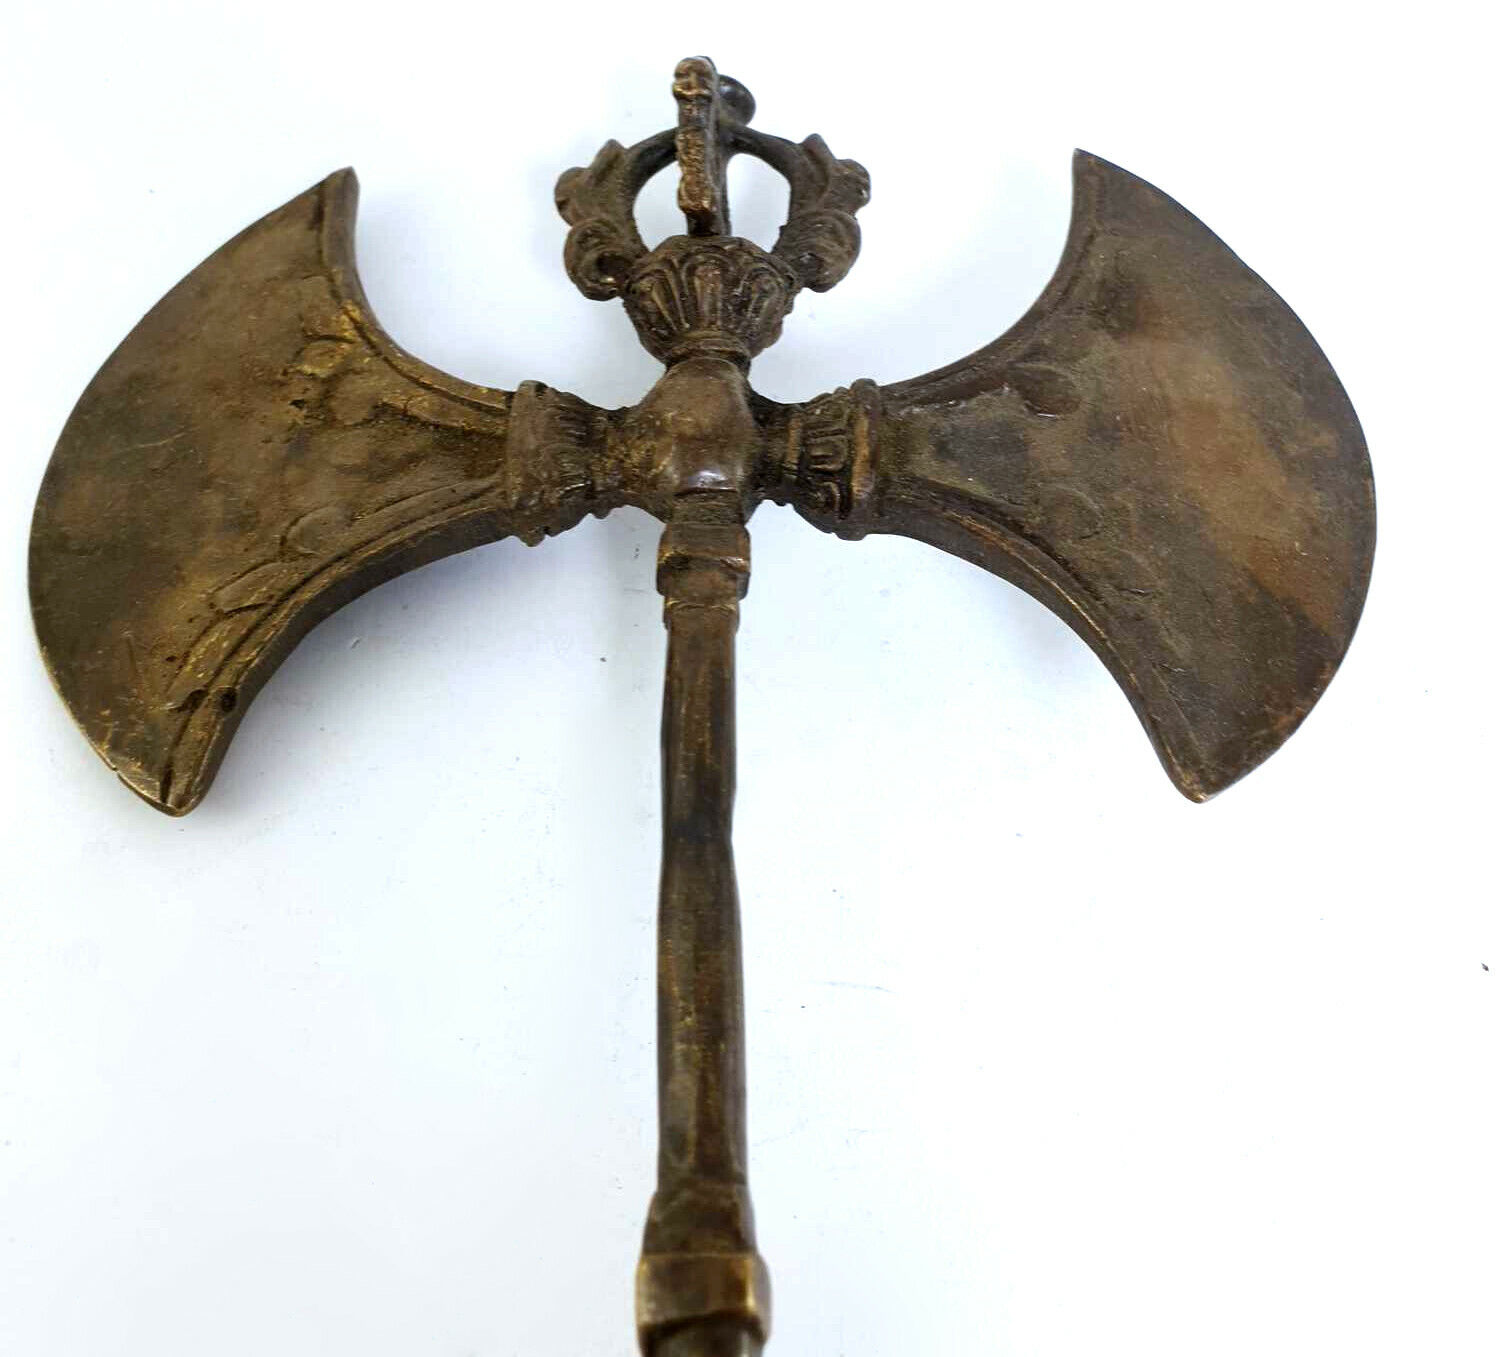 Aged Tibetan Brass Buddhist Ritual Double Axe Nepal Old Vintage Antique Finish 